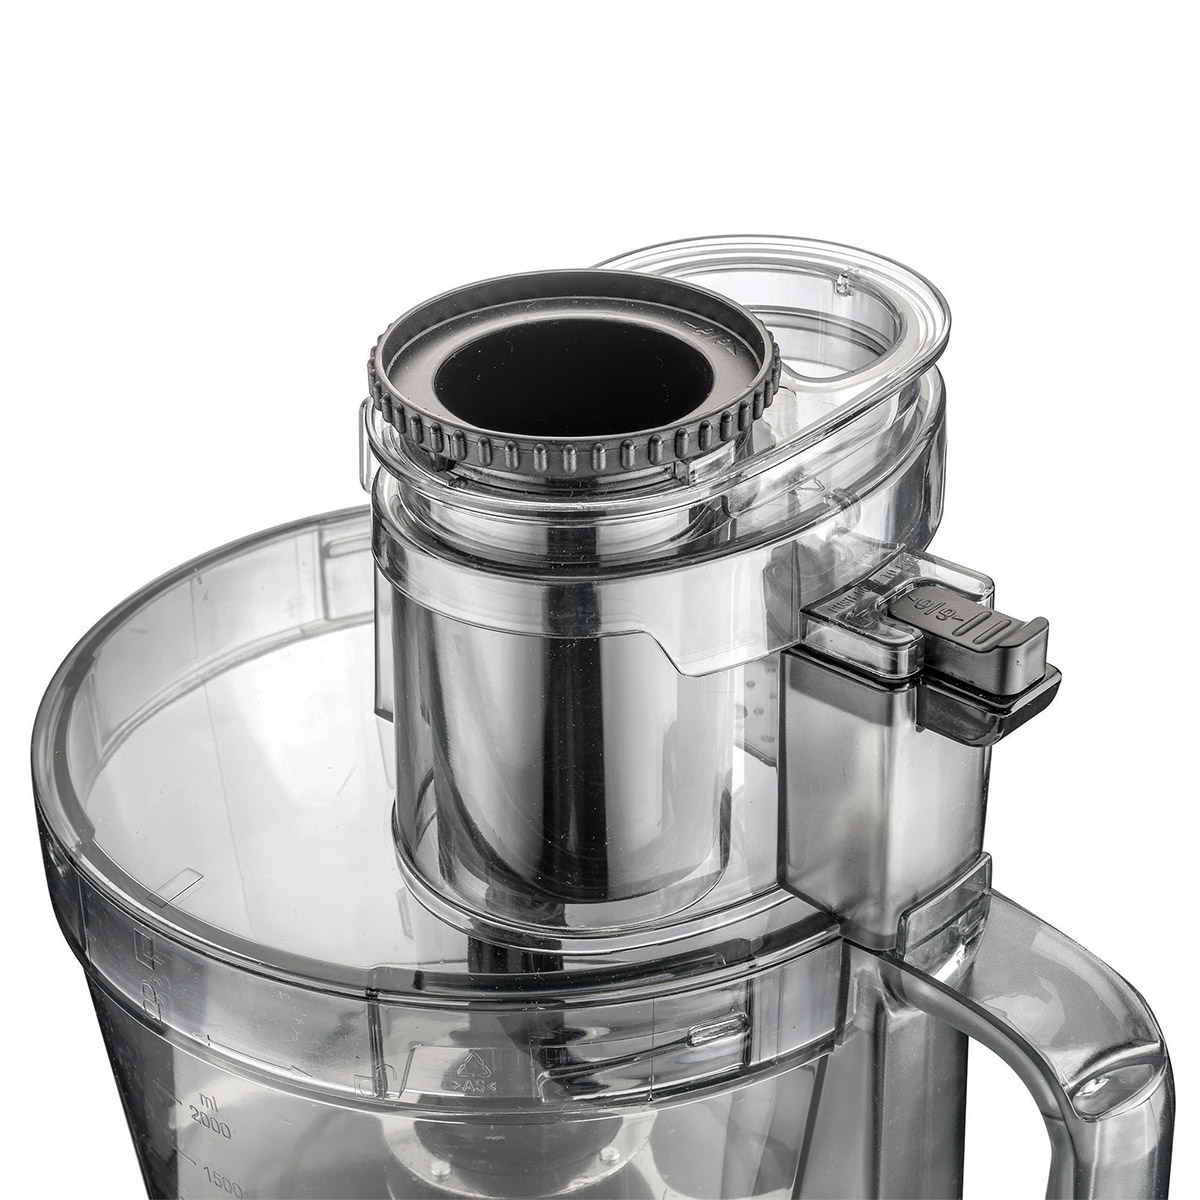 How to grate cheese with a Cuisinart food processor?  brand revi, food processor cheese grater